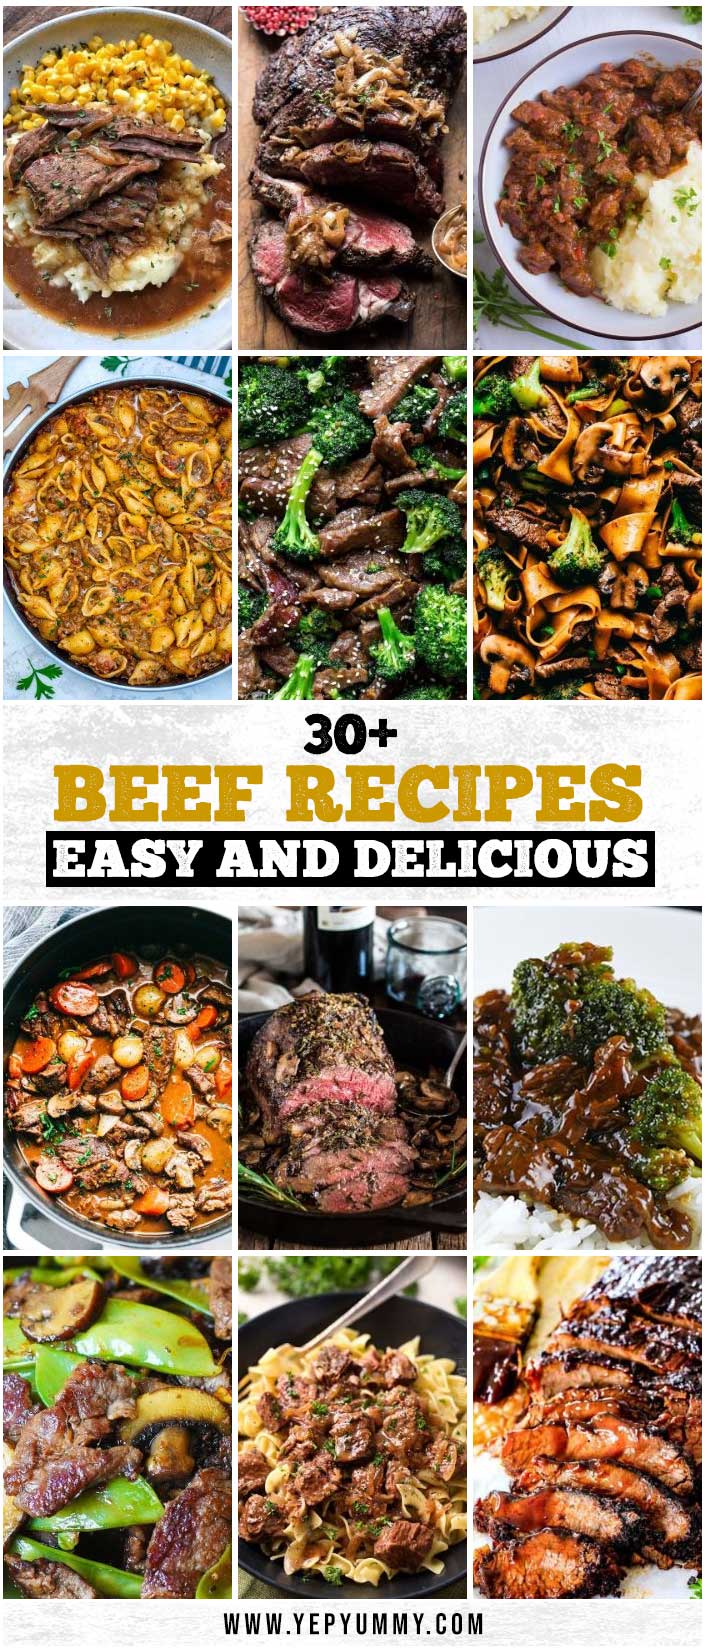 Beef Recipes: Easy And Delicious